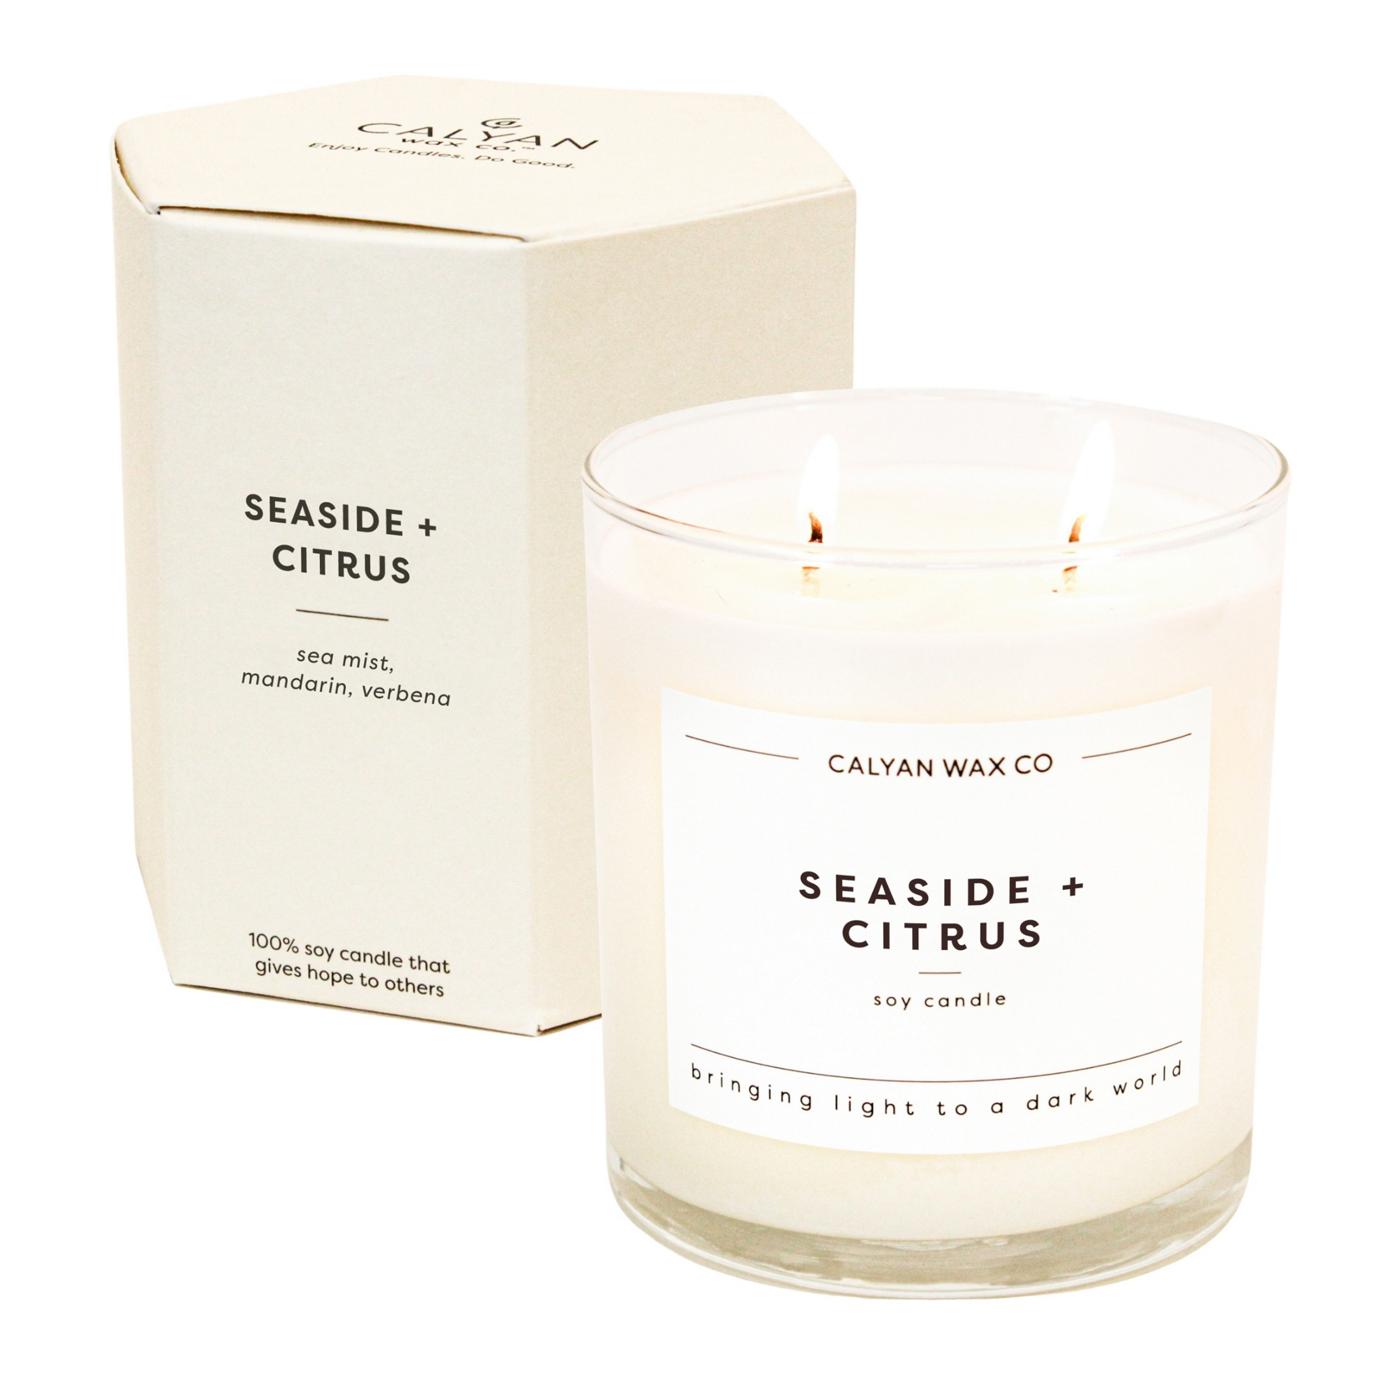 Calyan Wax Co. Seaside + Citrus Scented Soy Candle; image 2 of 3